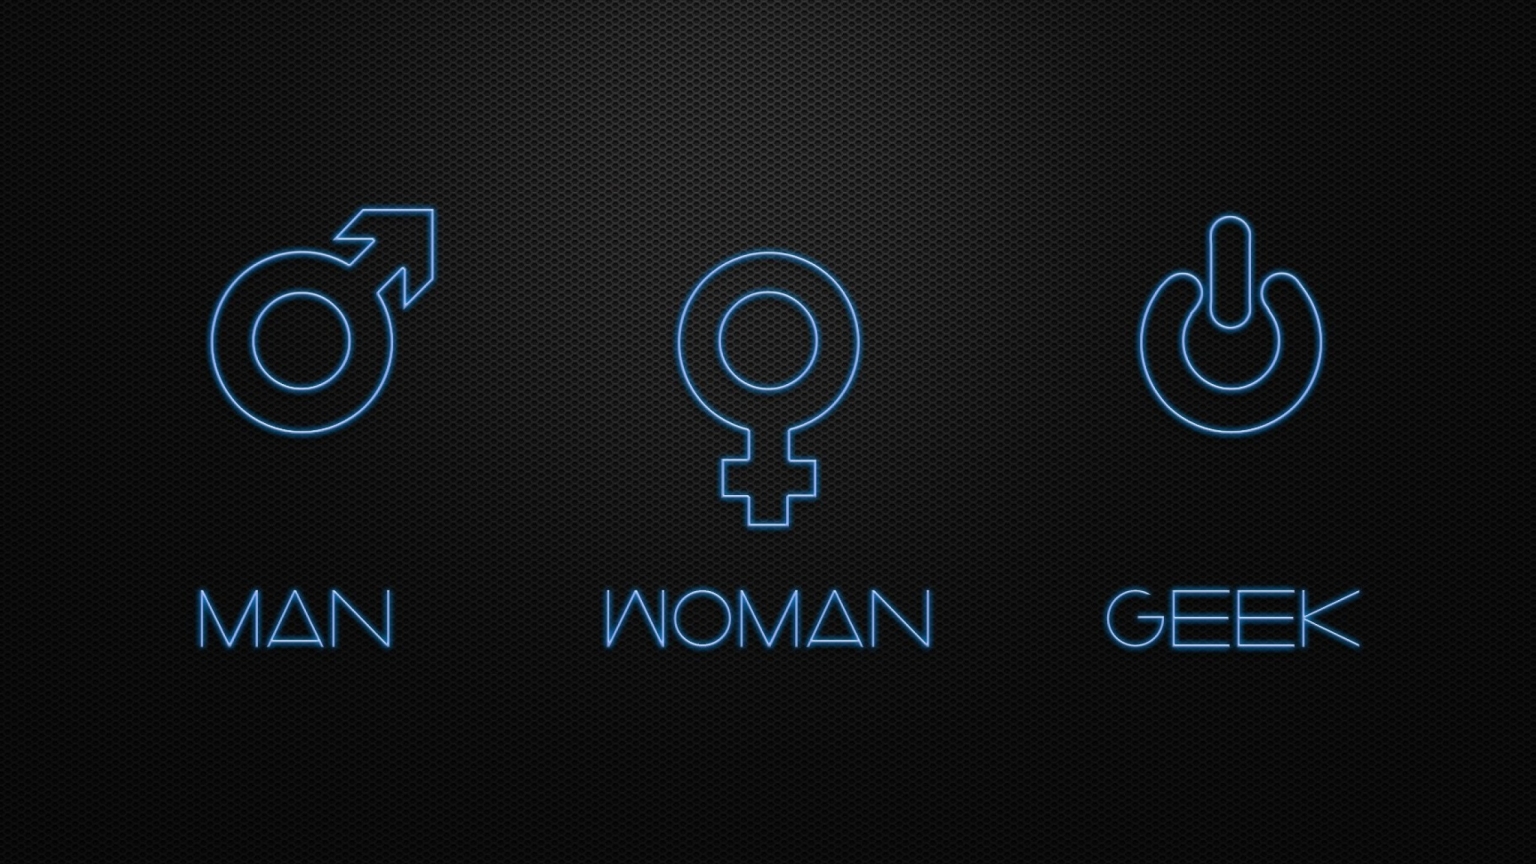 Man Woman and Geek for 1536 x 864 HDTV resolution